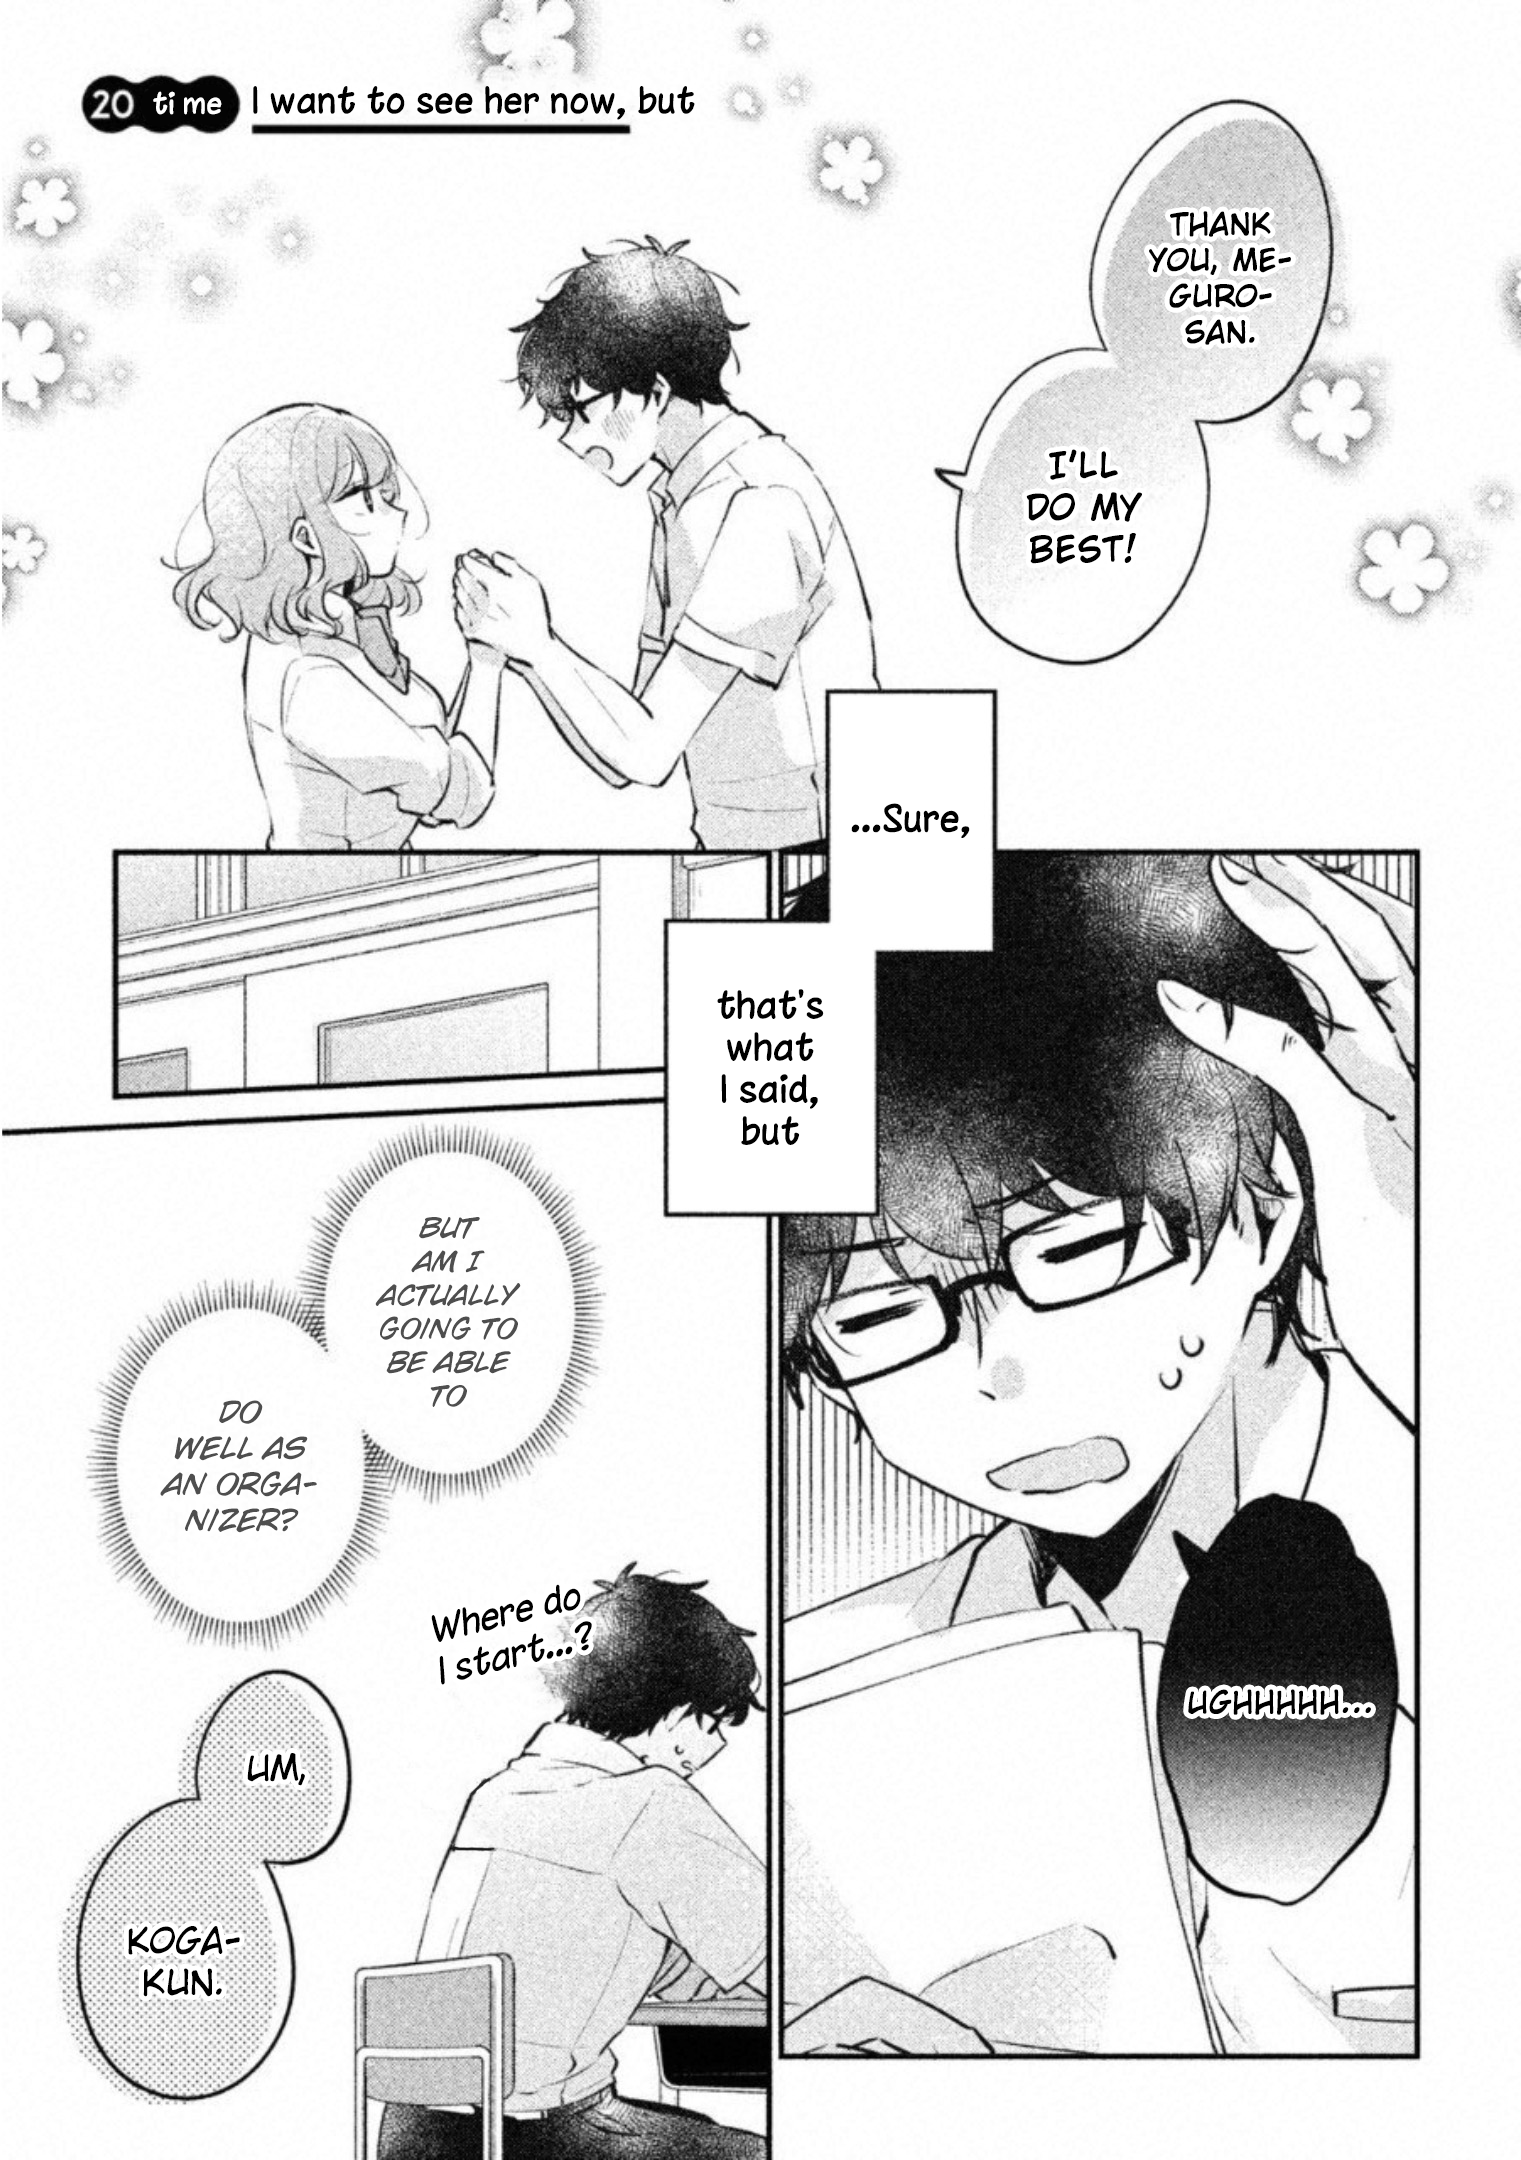 It's Not Meguro-San's First Time Vol.3 Chapter 20: I Want To See Her Now, But - Picture 2